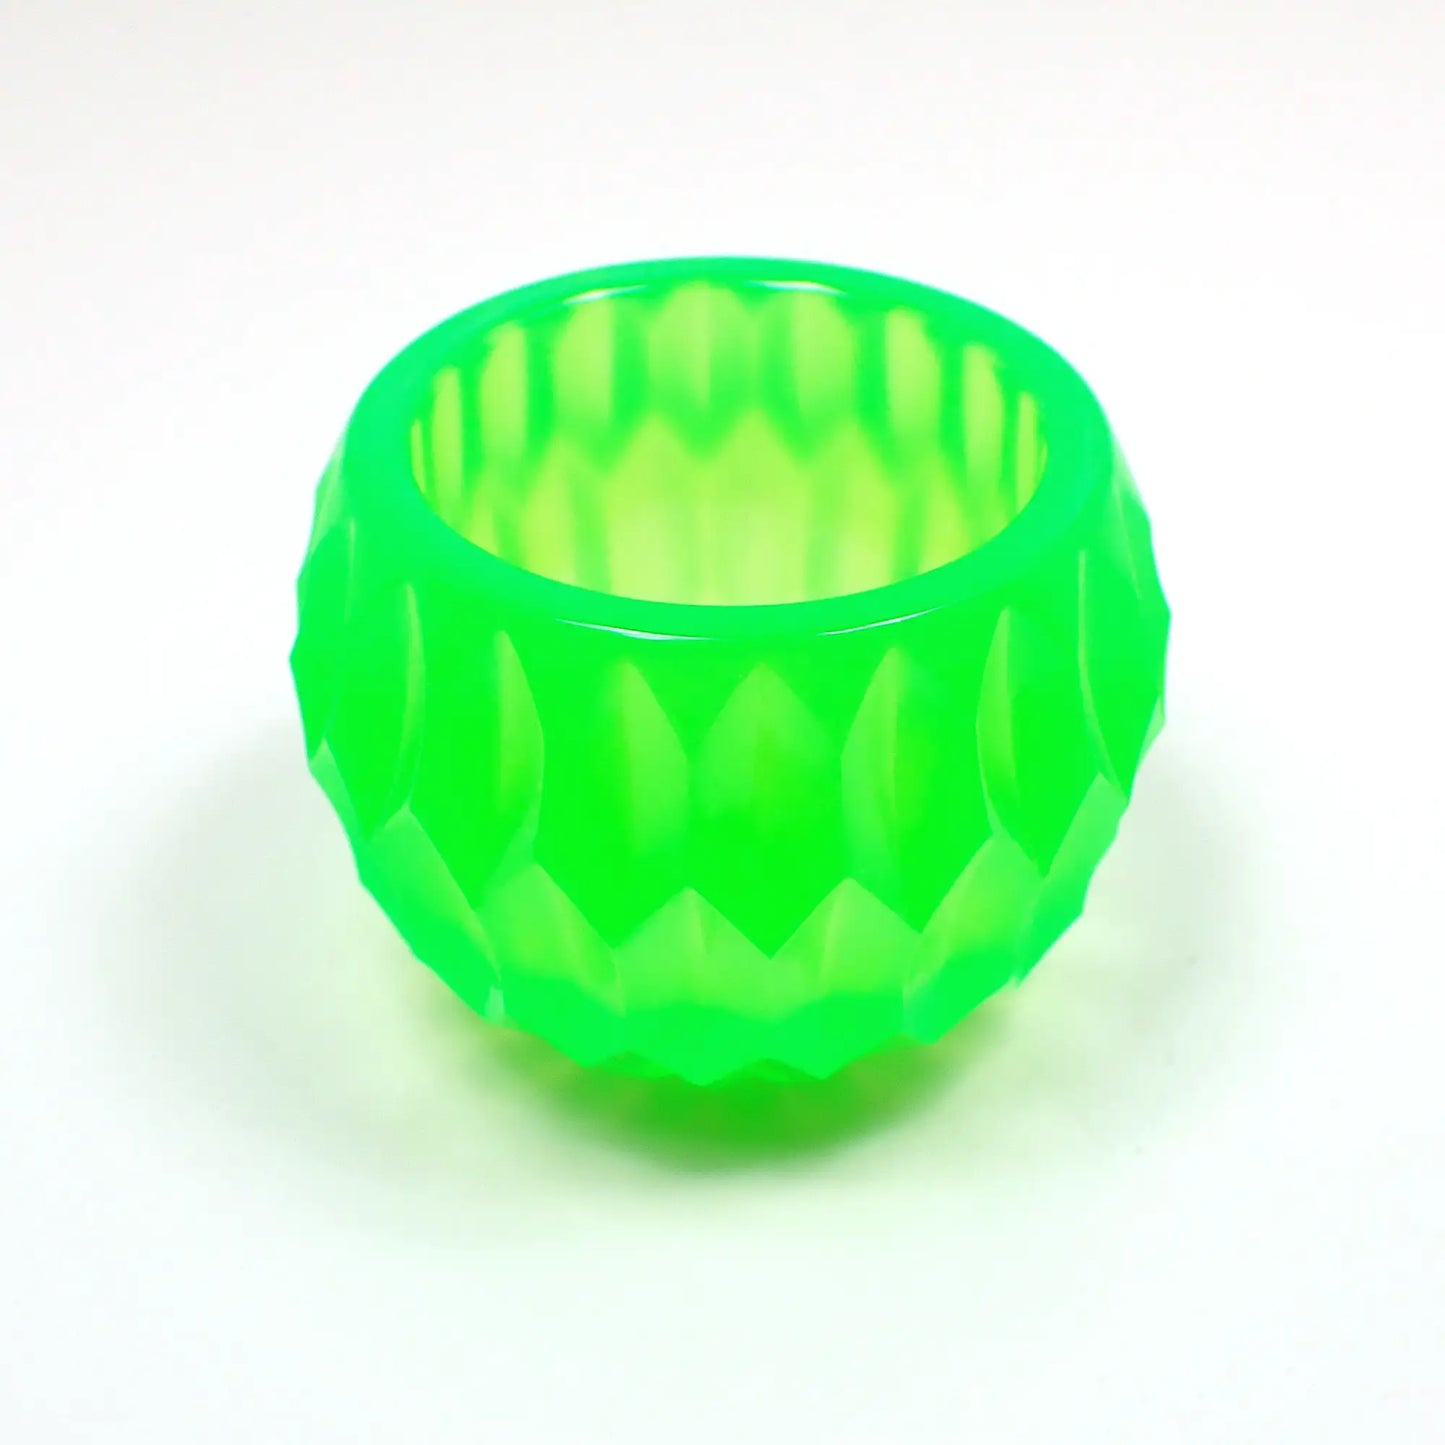 Angled view of the handmade resin small succulent pot decorative bowl. It is bright neon green in color and has a rounded shape with an indented hexagon pattern.